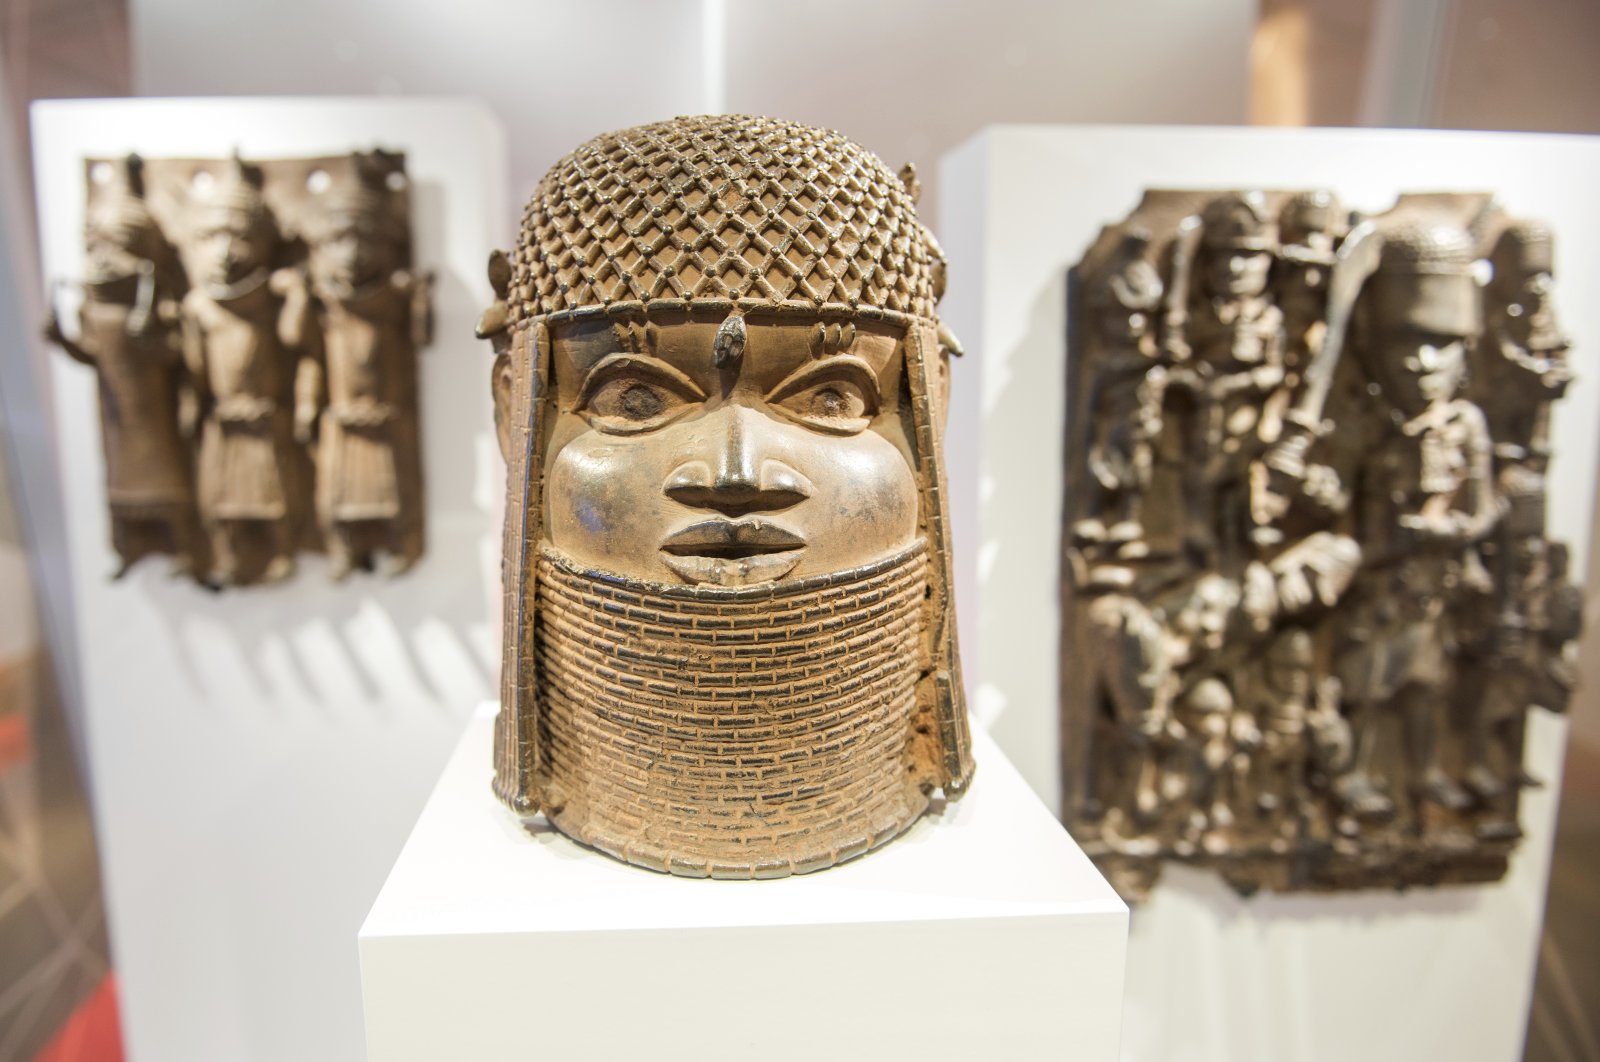 Three pieces of the famed Benin Bronzes are displayed at the Museum for Art and Crafts in Hamburg, Germany, Feb. 14, 2018. (dpa via AP)